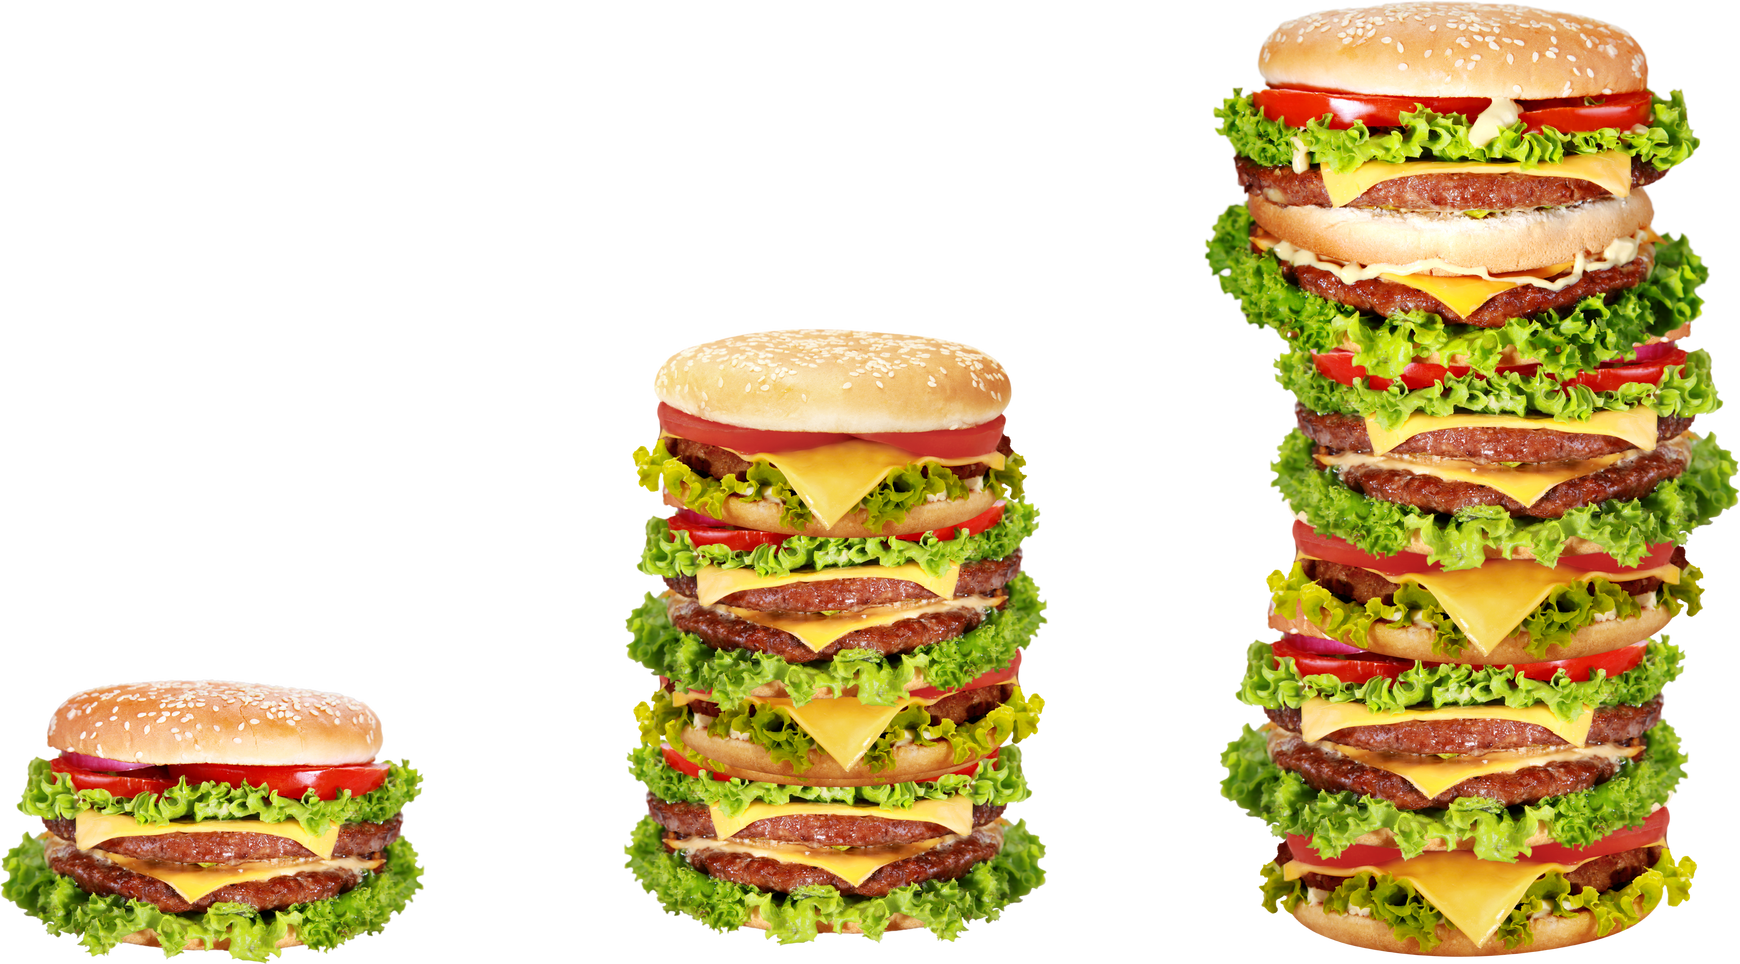 Progressively bigger stacks of burgers in the shape of a graph